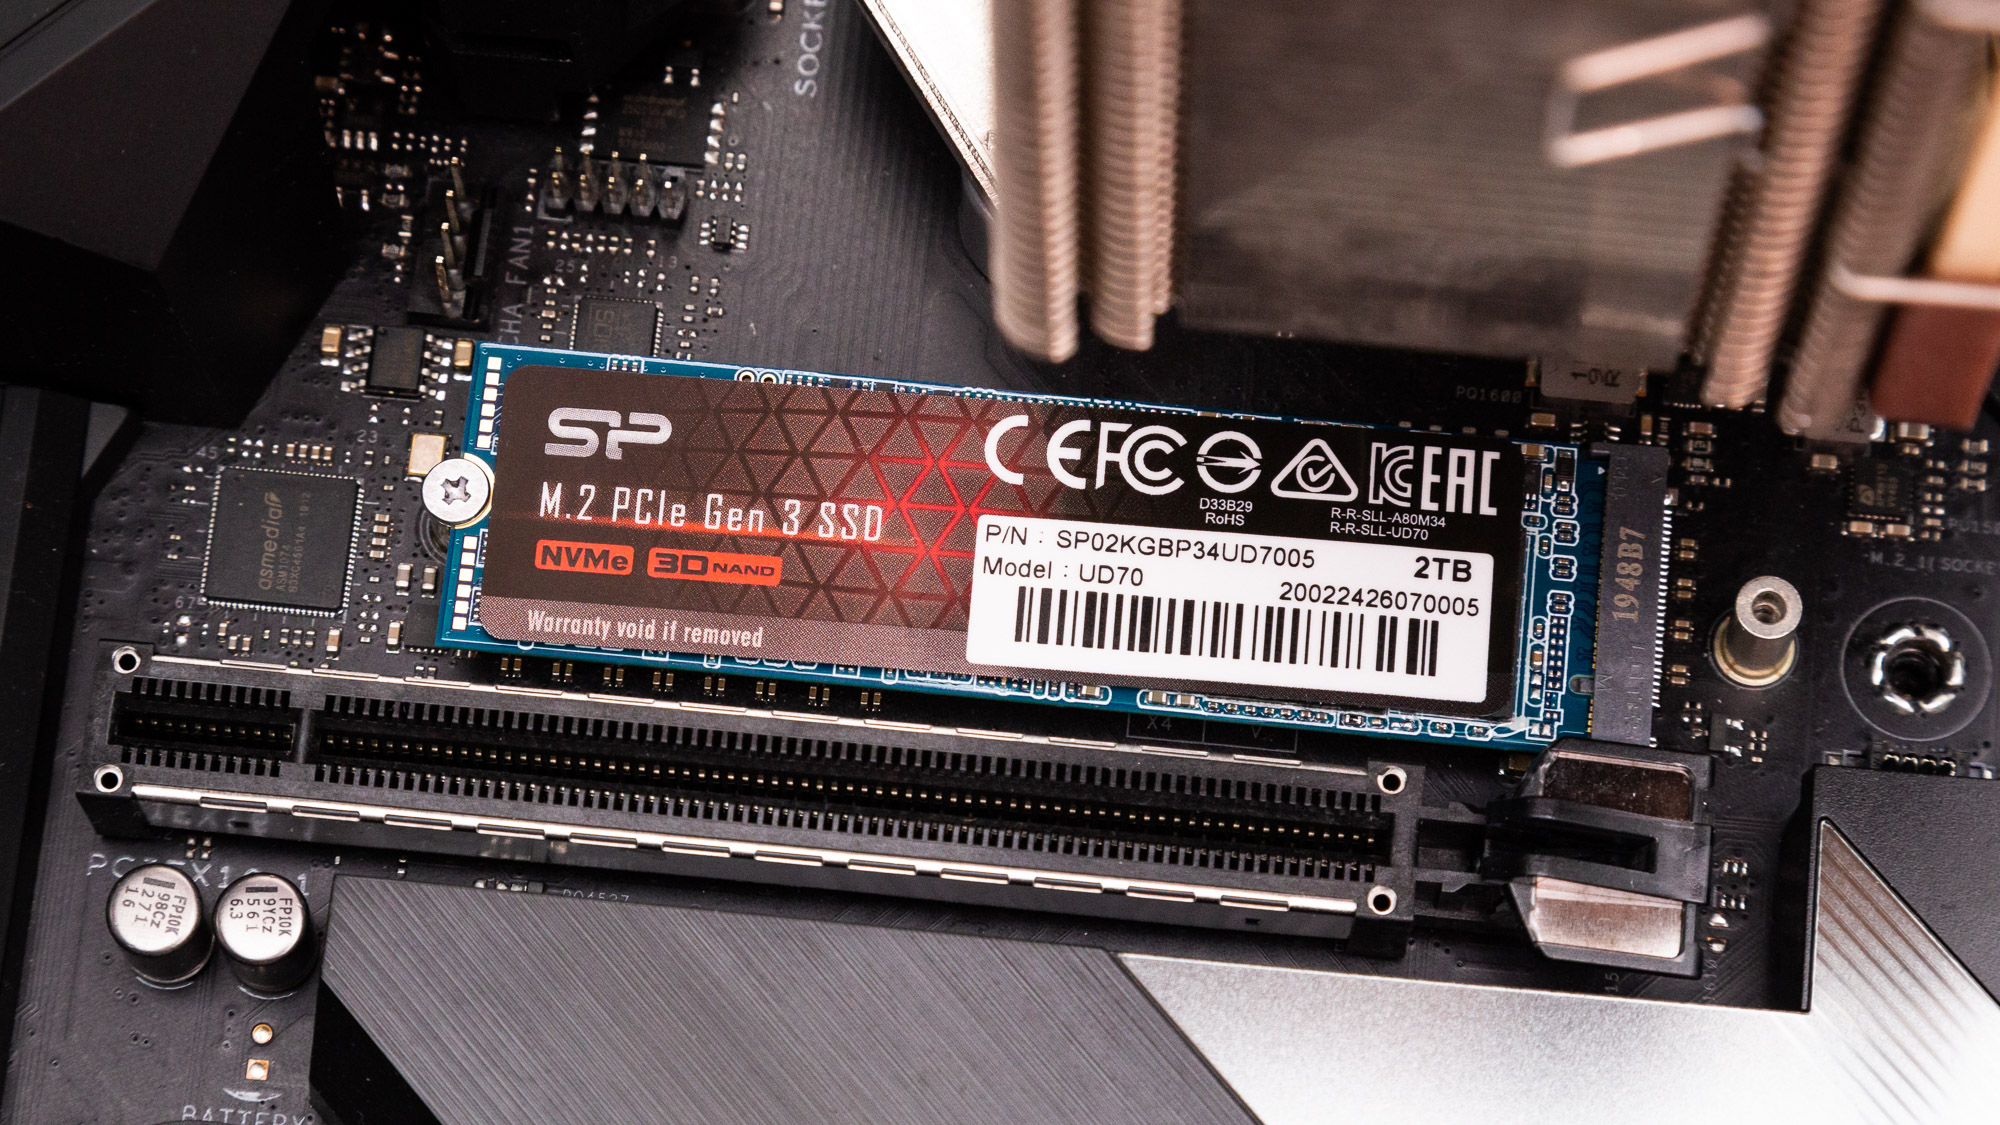 silicon-power-ud70-m.2-ssd-review:-low-cost-pcie-gen3-speed